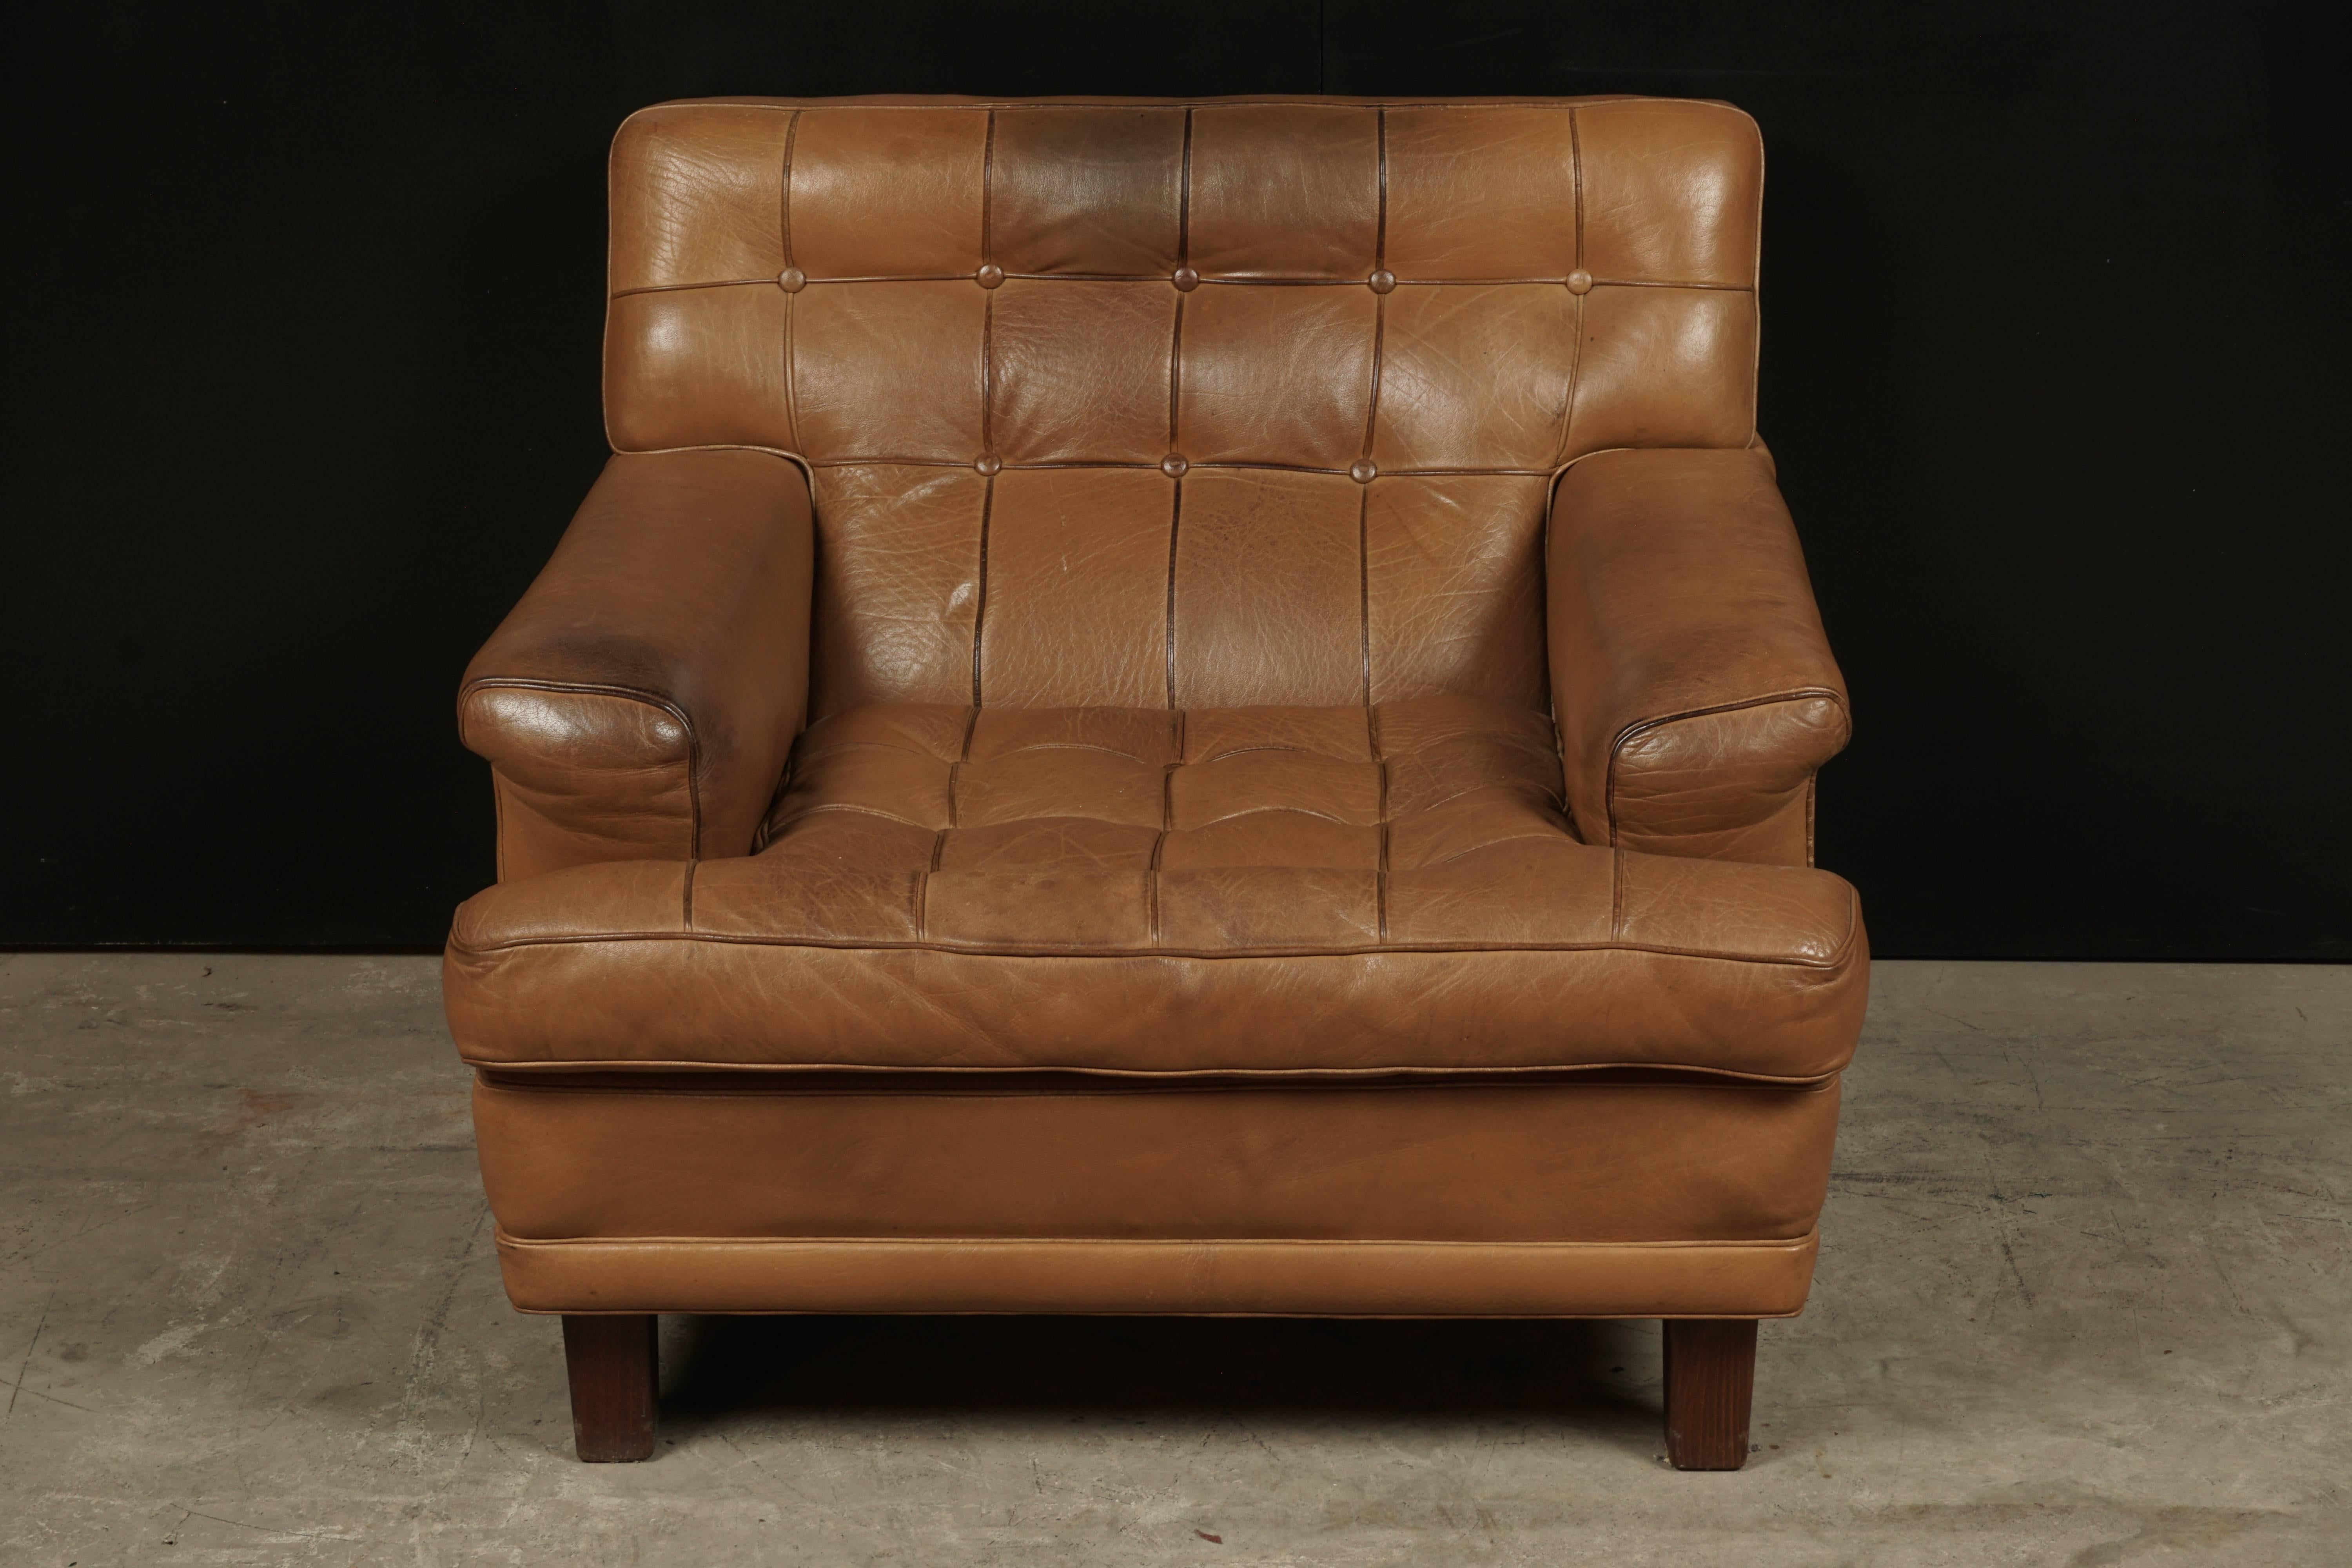 Arne Norell lounge chair Model Merkur, Sweden, circa 1960. Original cognac buffalo leather upholstery. Manufactured by Norell Möbel AB.